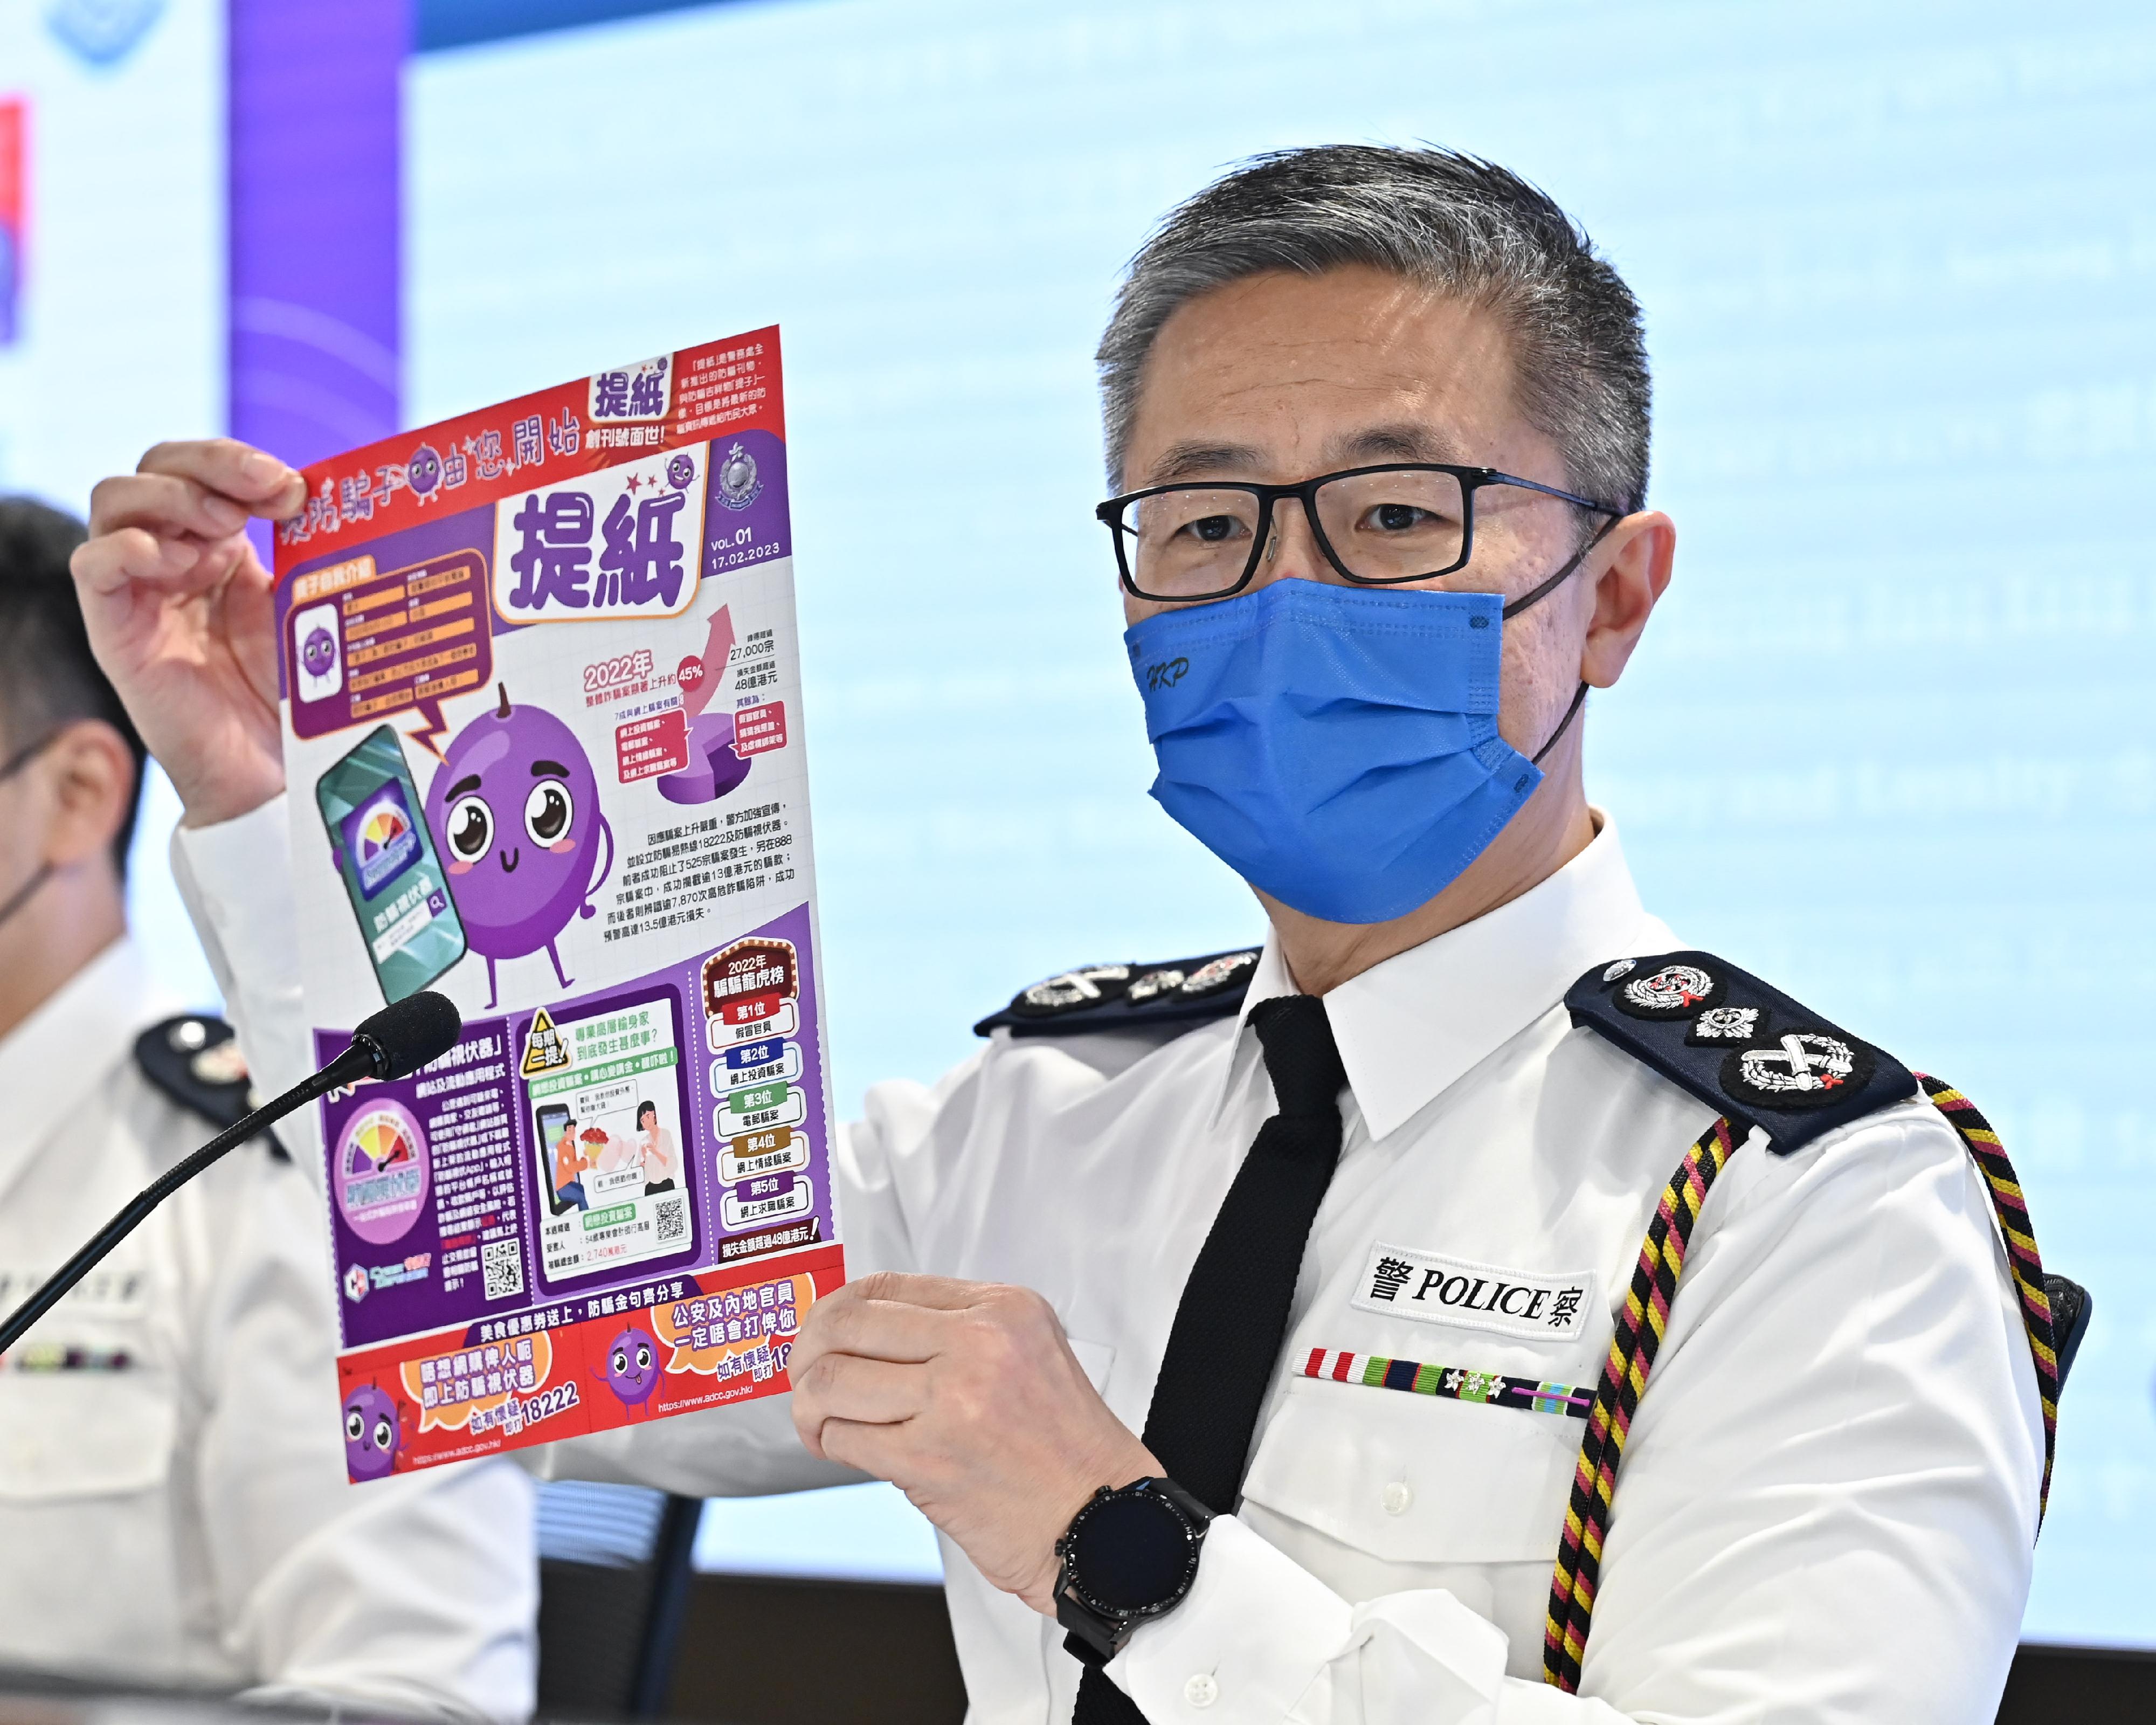 The Commissioner of Police, Mr Siu Chak-yee, showed police’s latest anti-deception publicity publication, “The Little Grape Paper”, to be distributed to the public through two free newspapers on February 17.